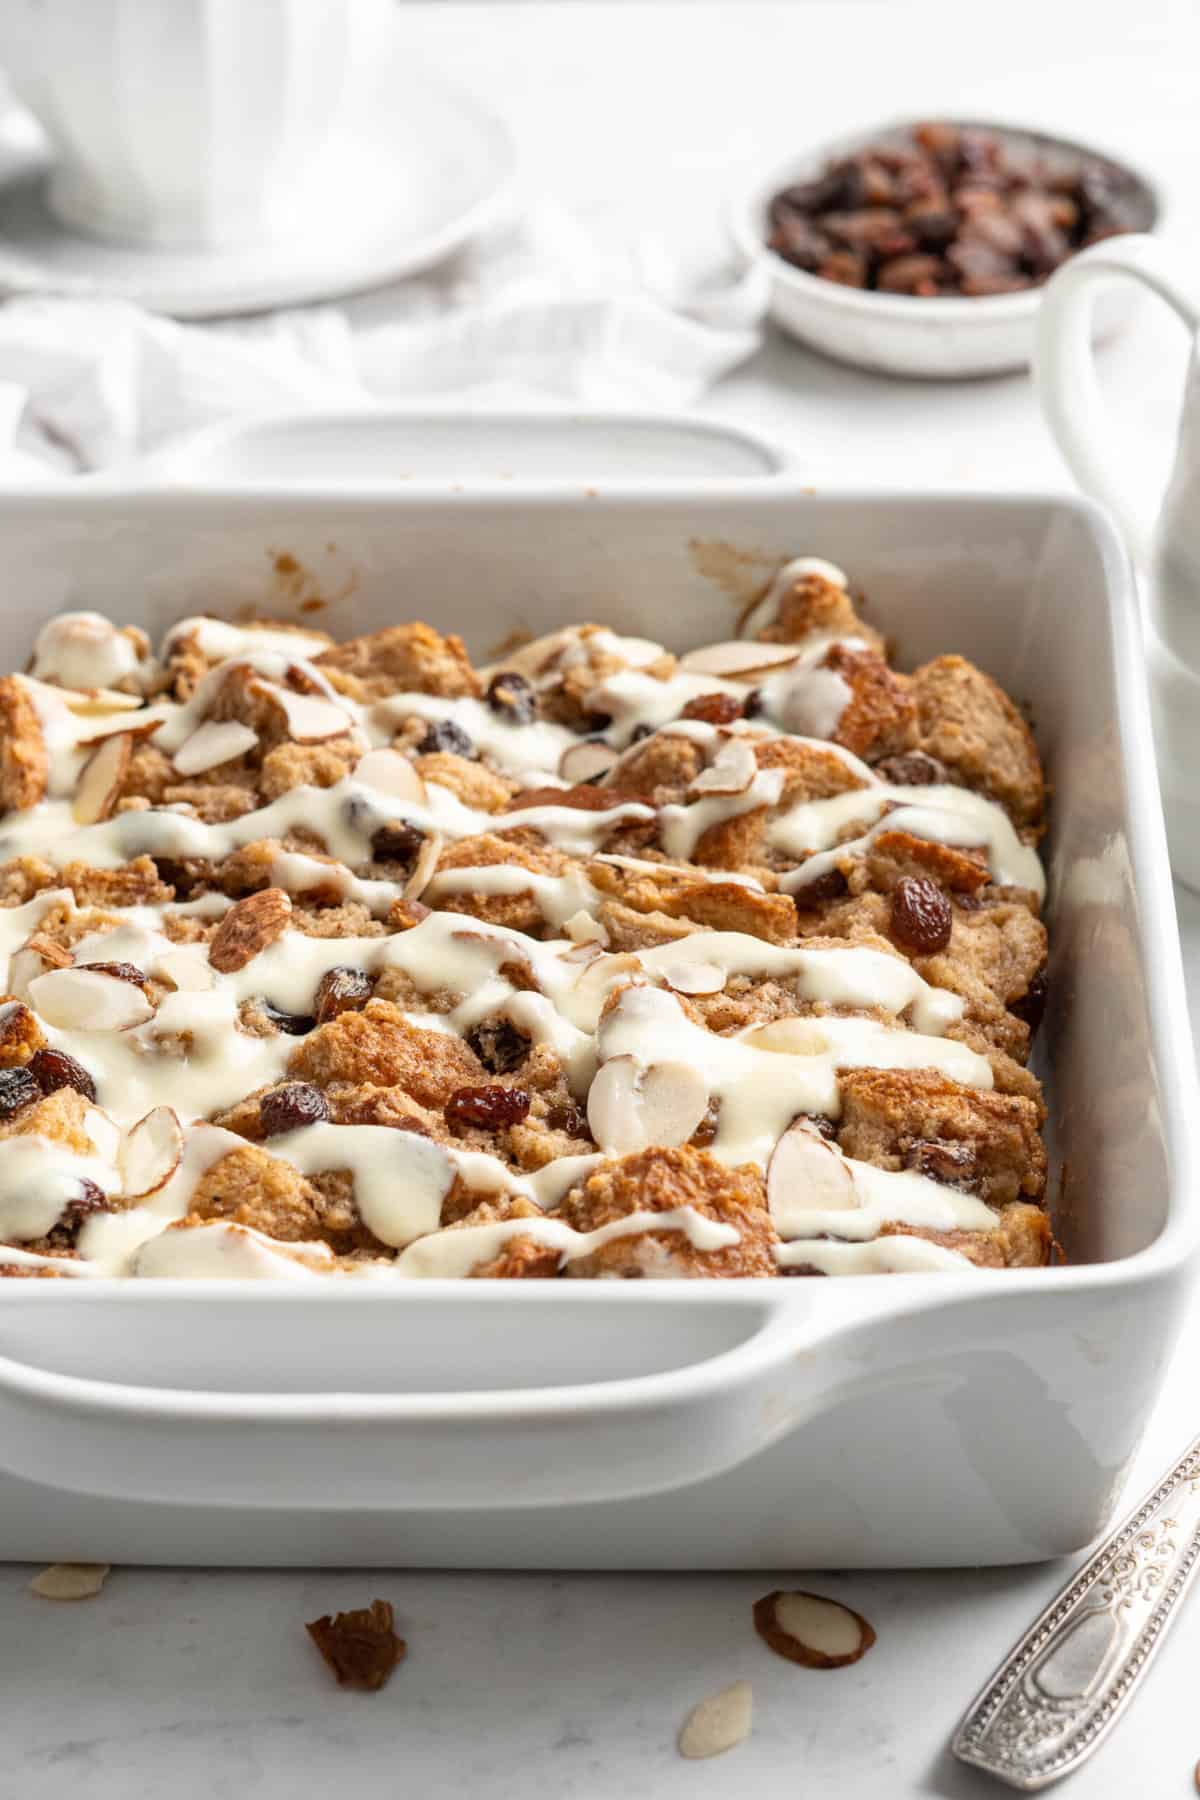 A white square baking dish of bread pudding with raisins.